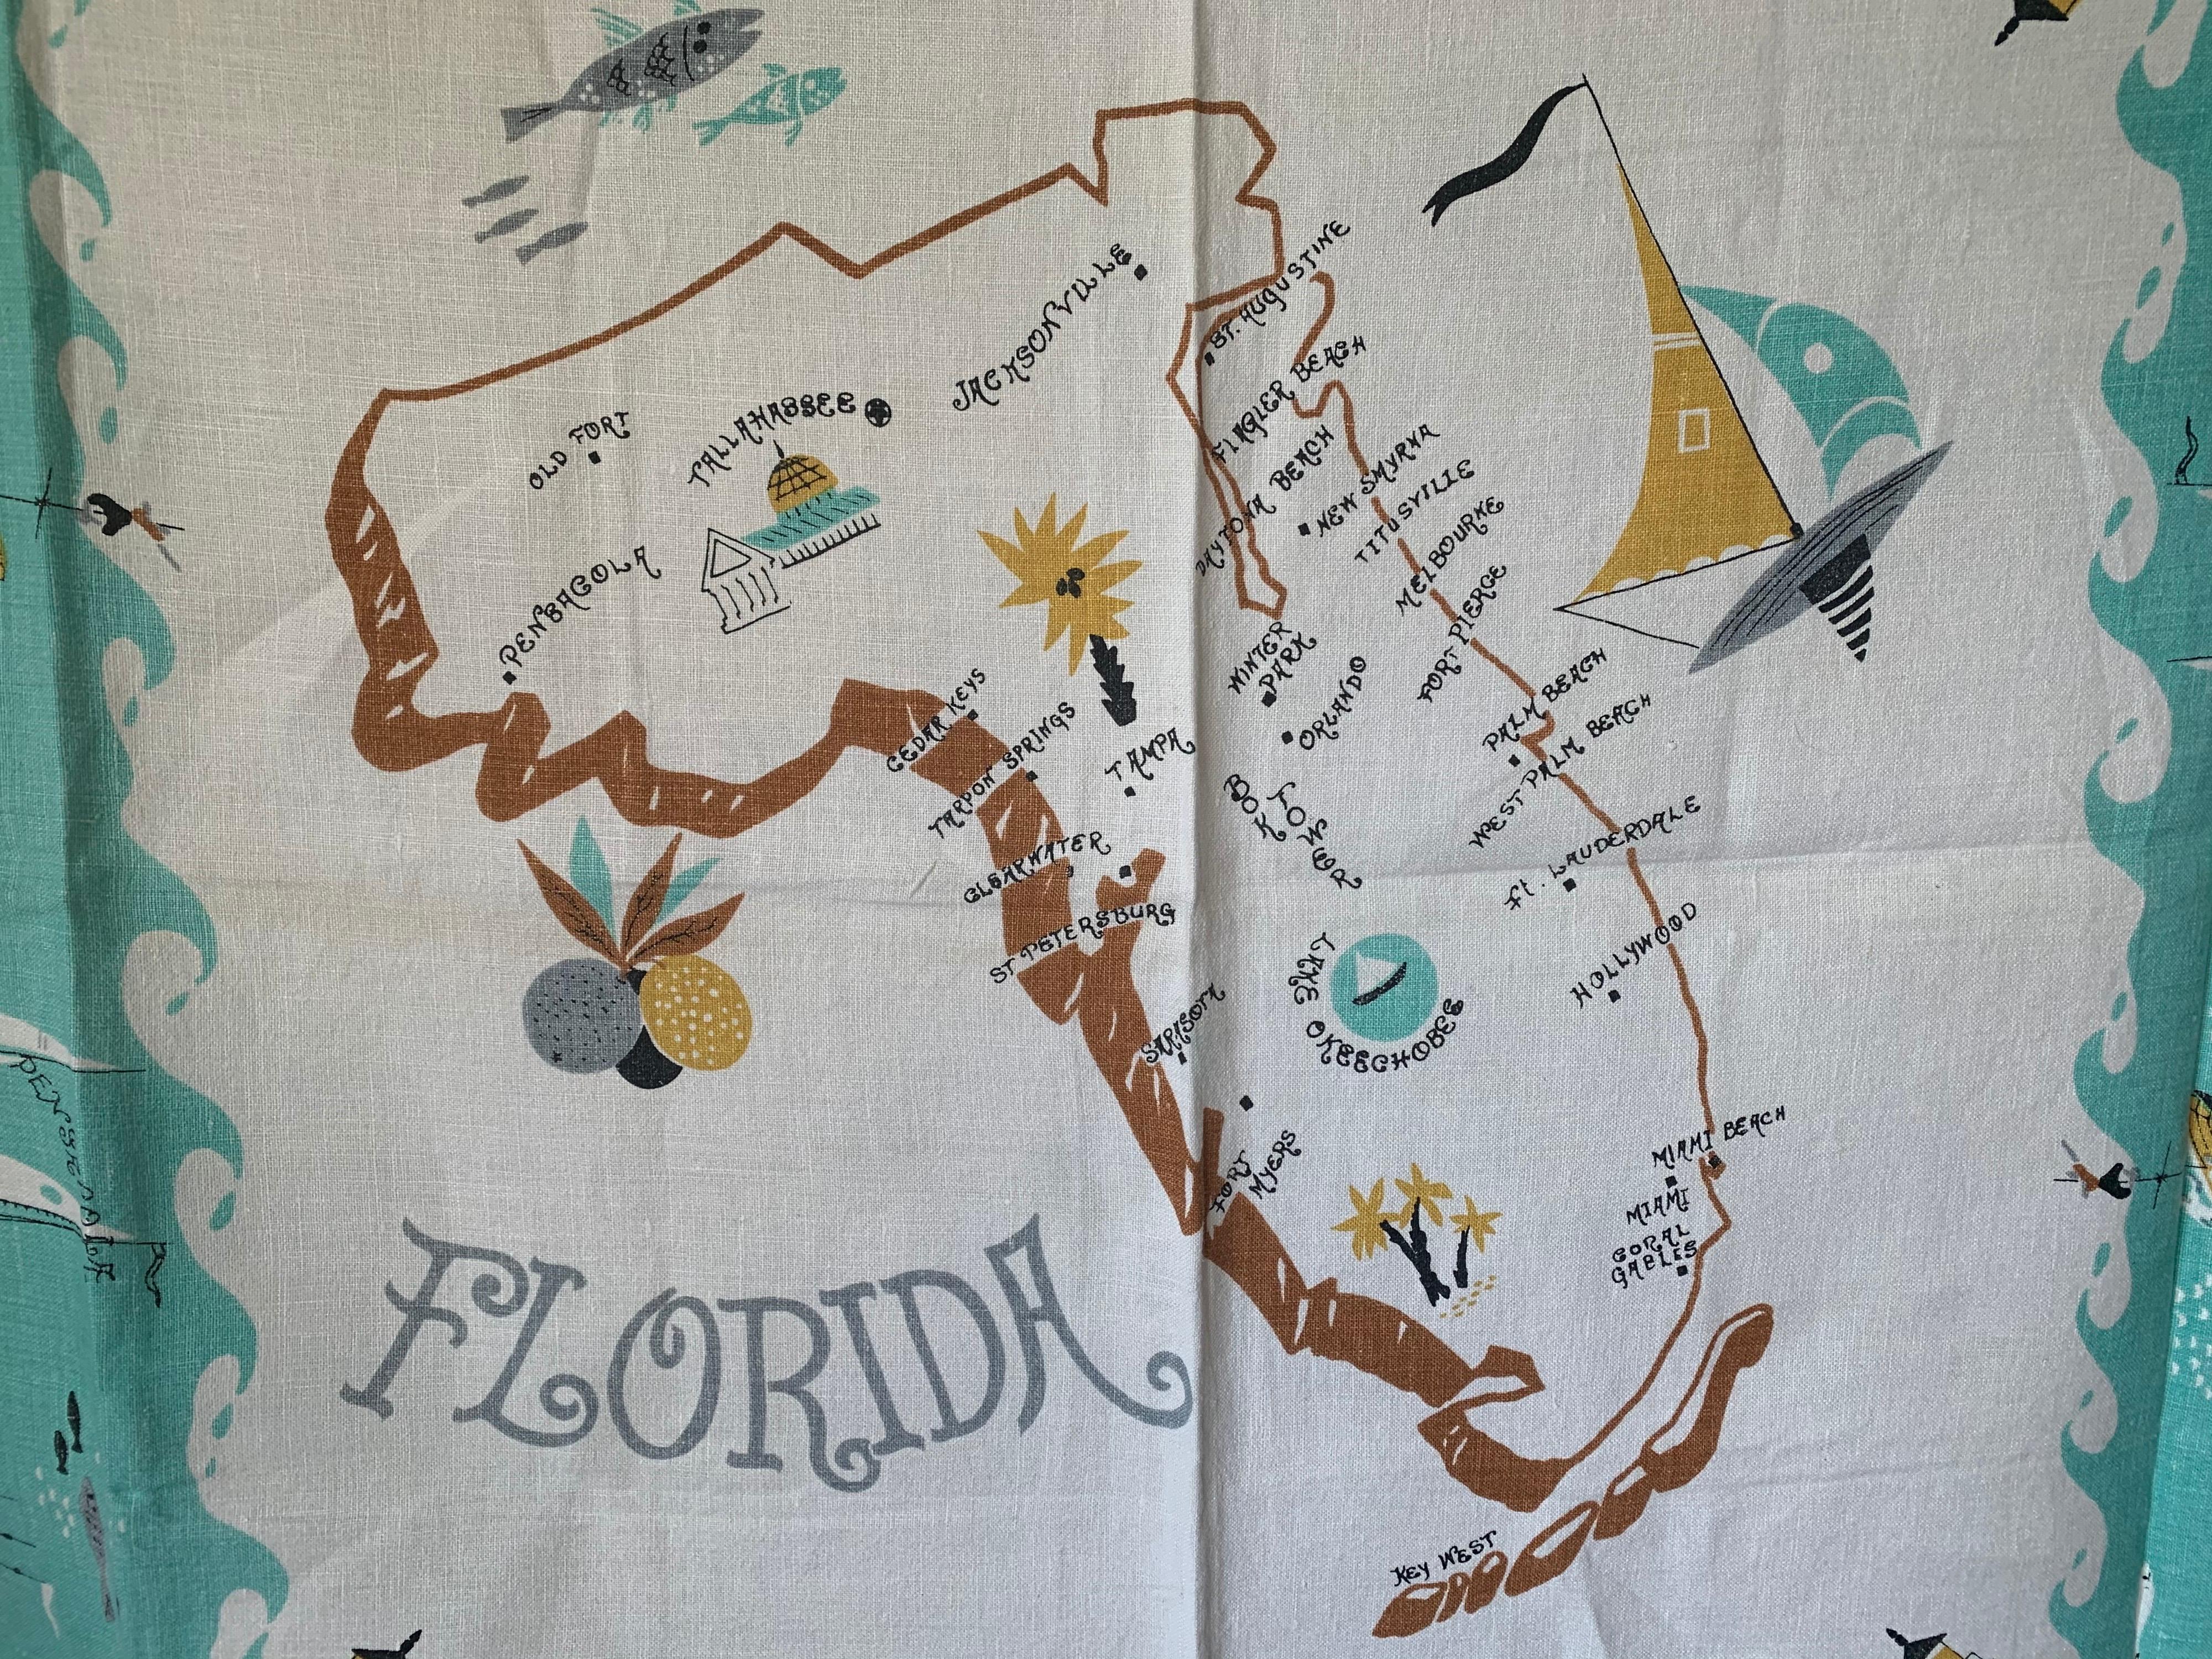 Midcentury Florida Souvenir Square Tablecloth In Good Condition For Sale In Stamford, CT